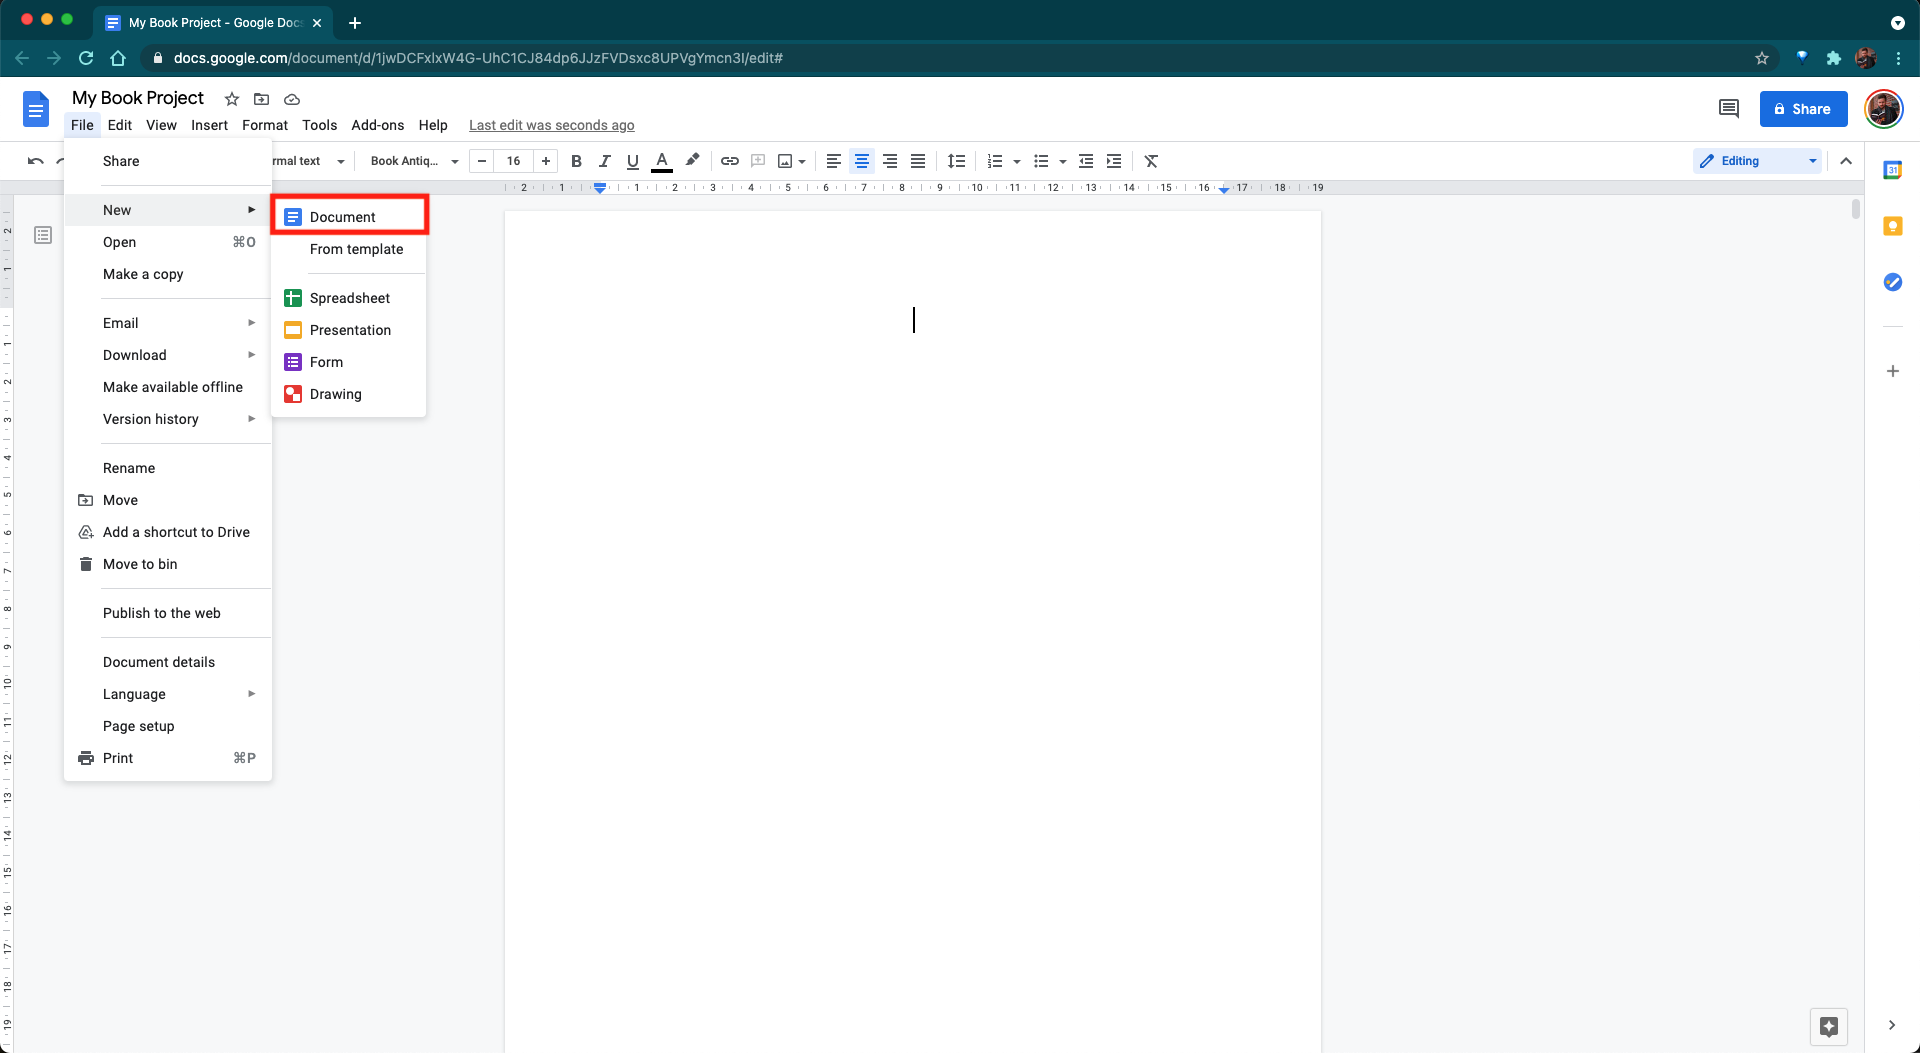 Create your new book project in Google Docs